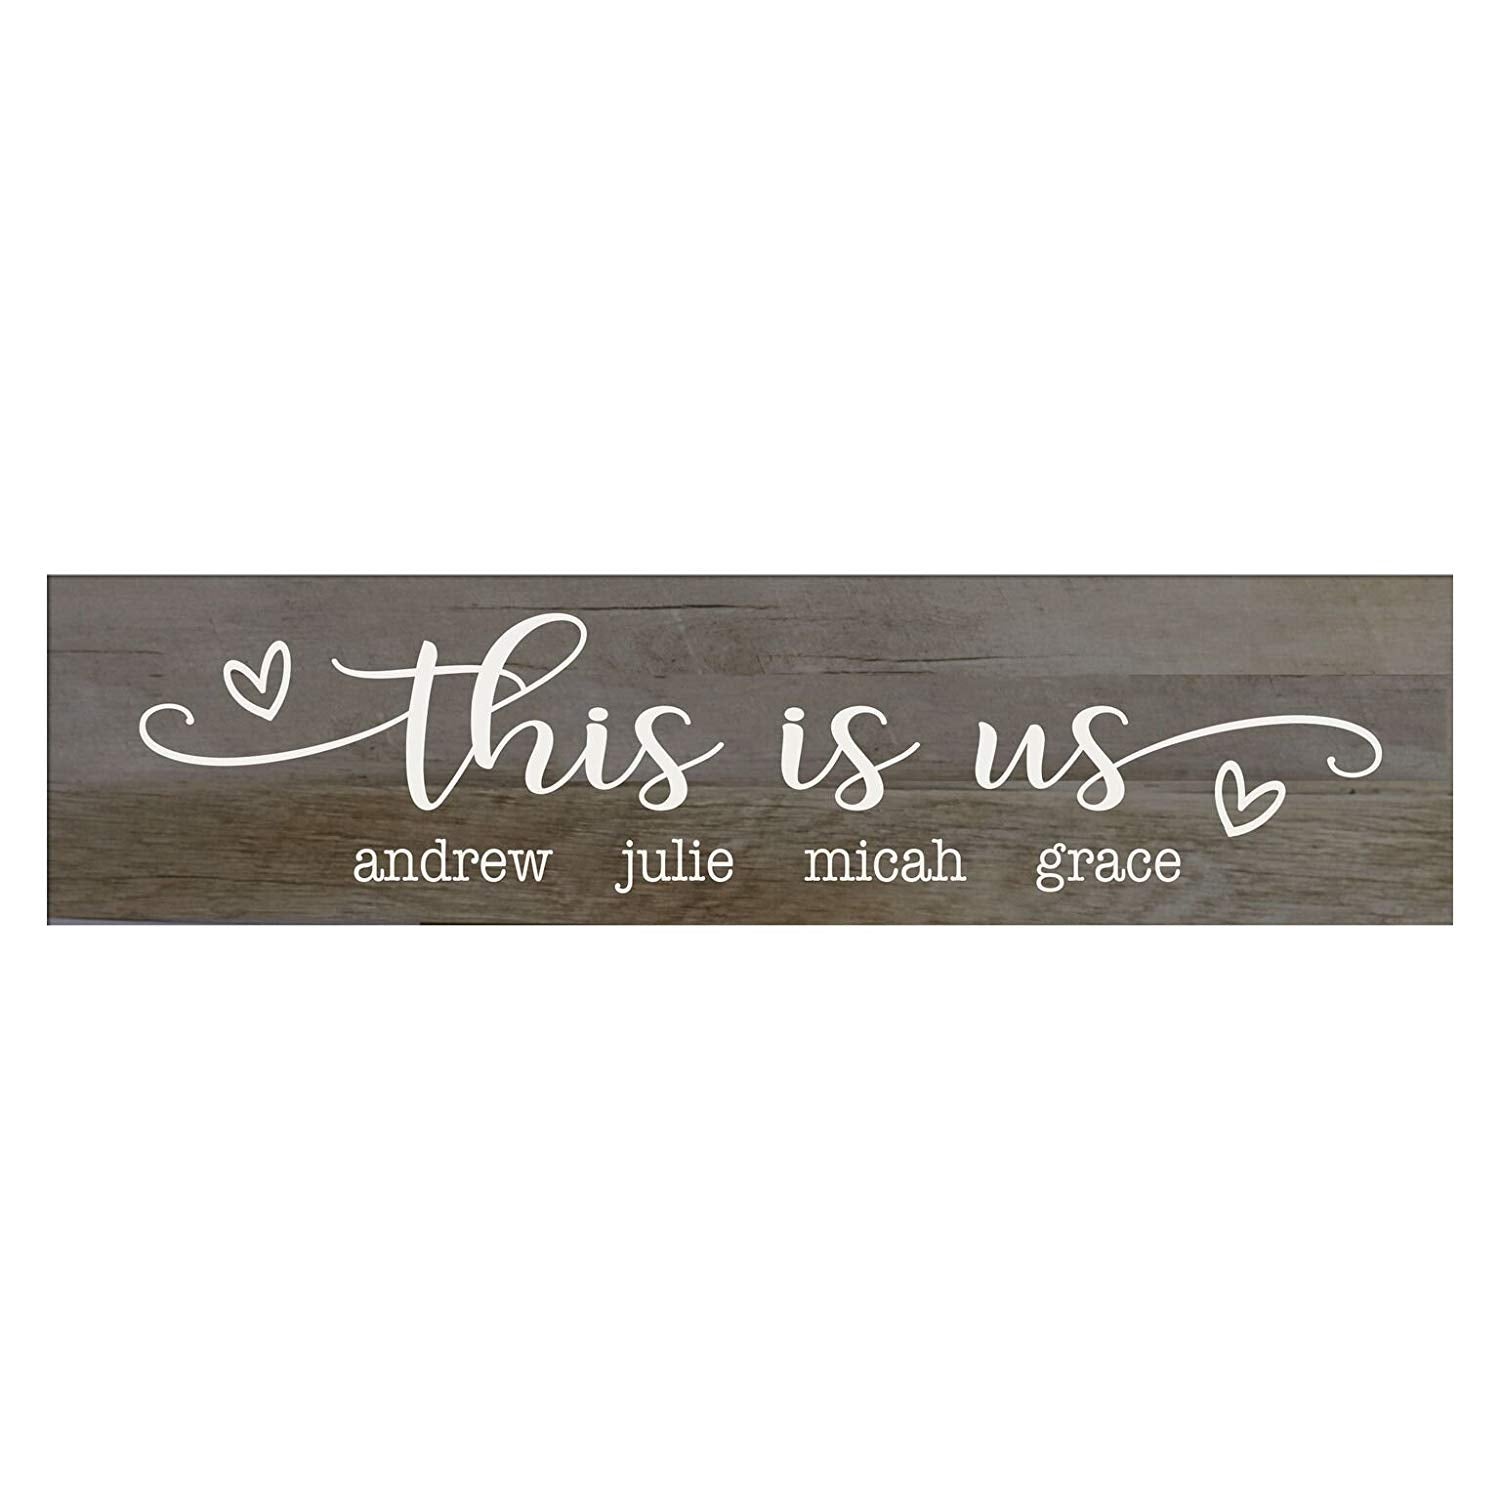 This is Us Wooden Wall Sign Art Size Barn Wood 10 x 40